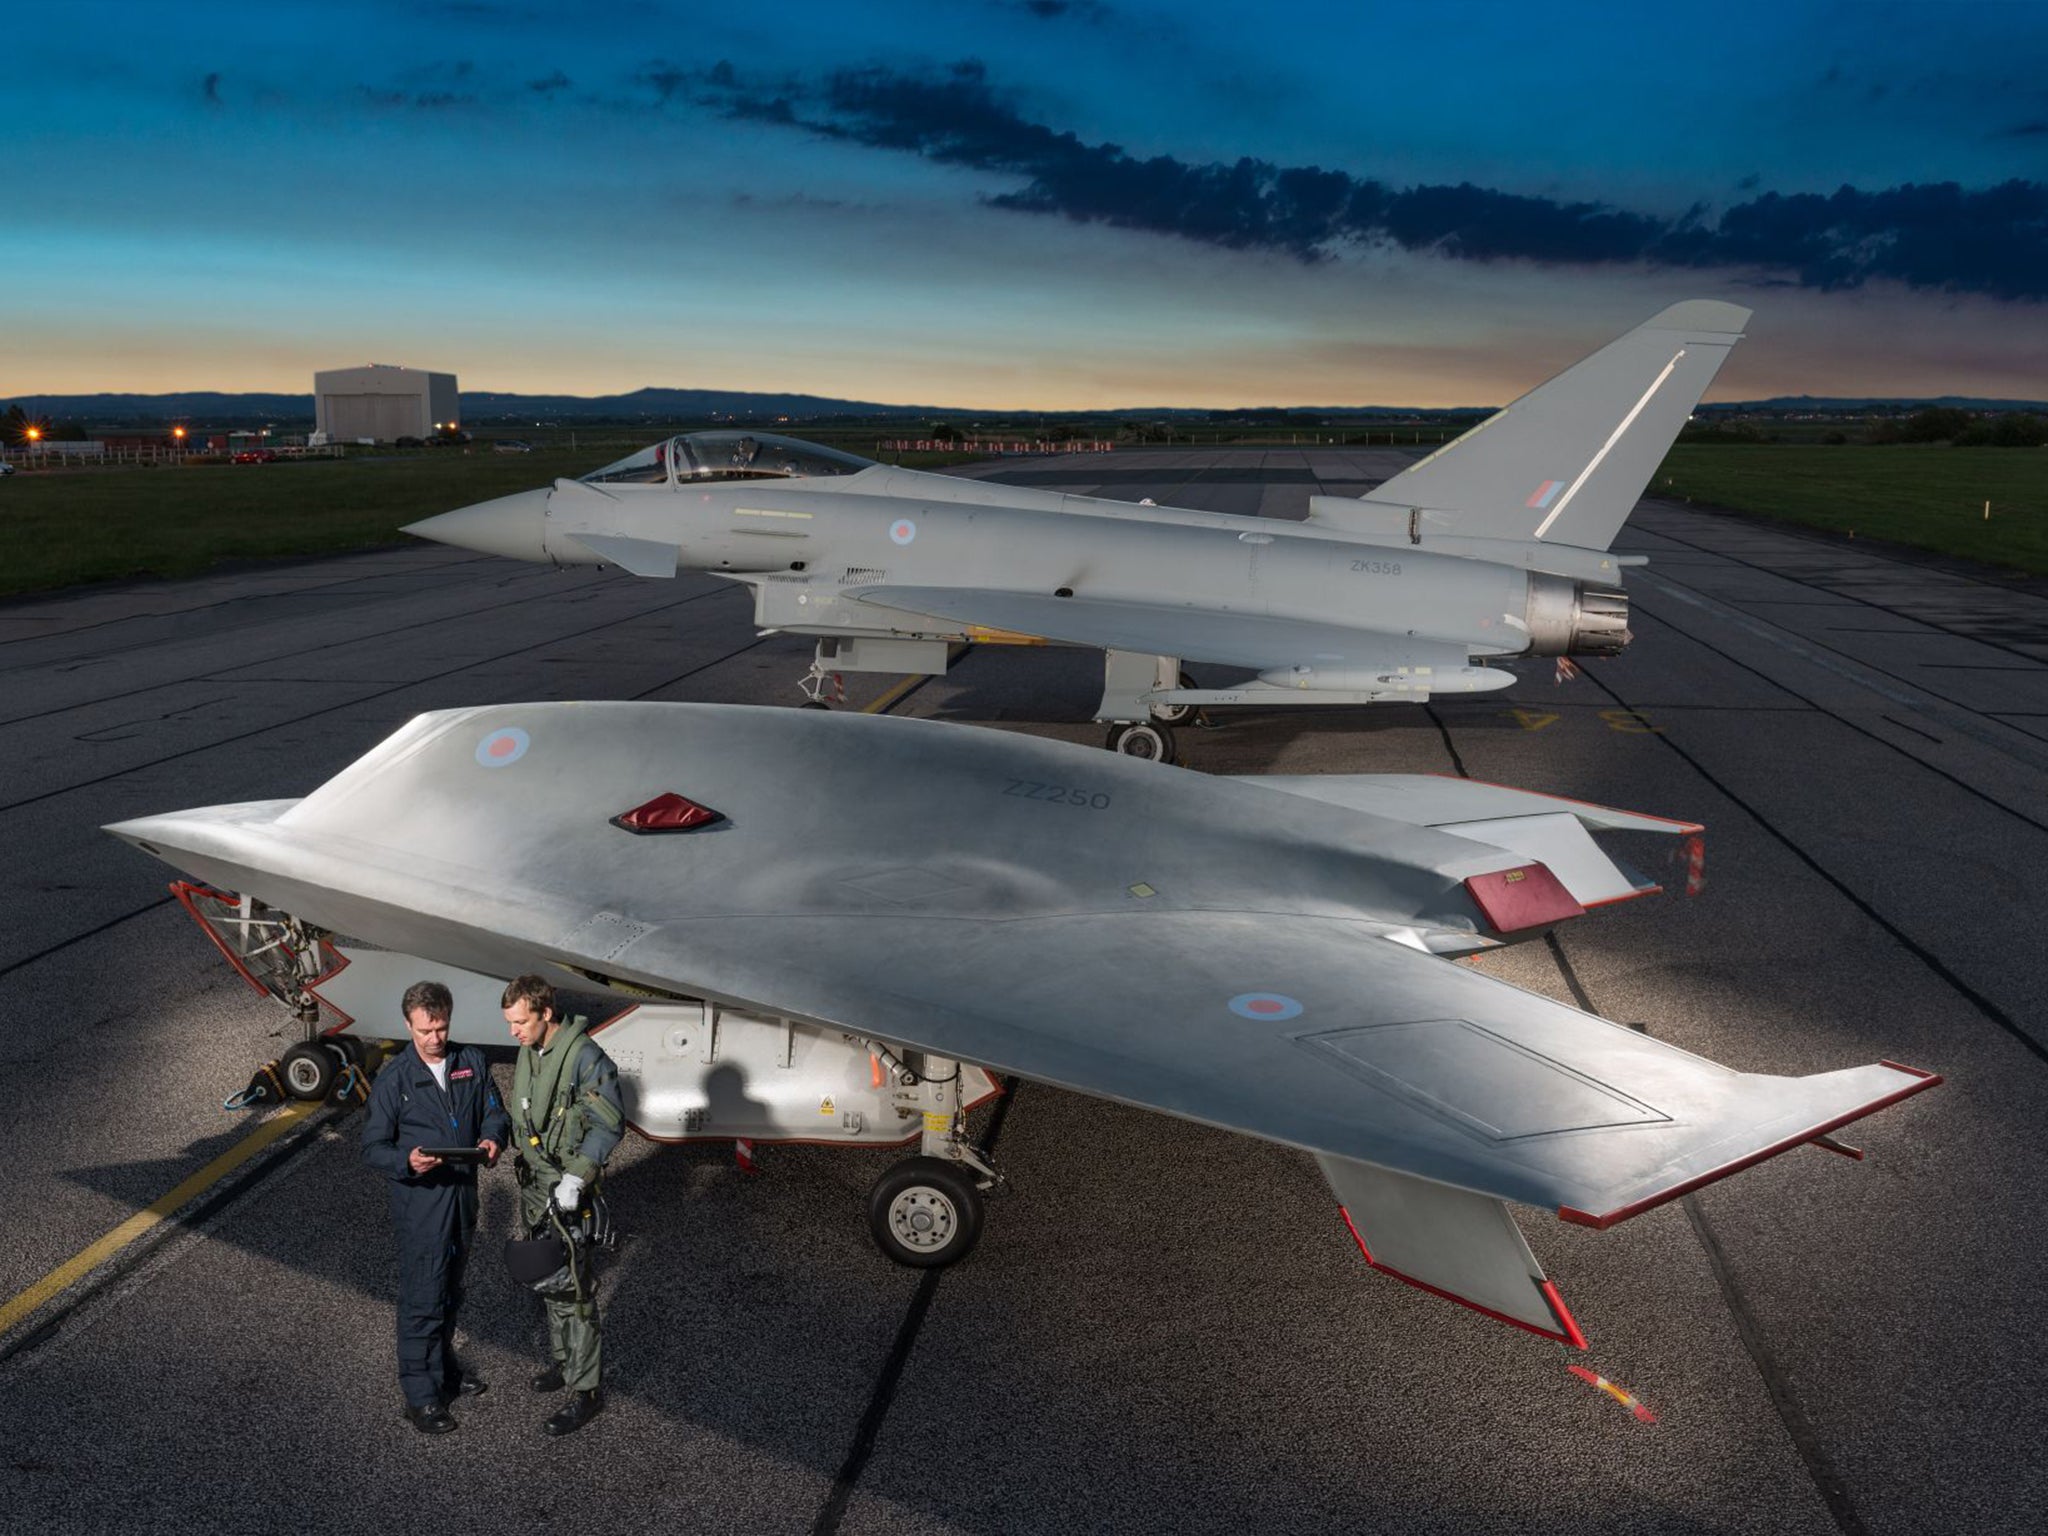 A new Taranis drone in front of a piloted Typhoon jet fighter